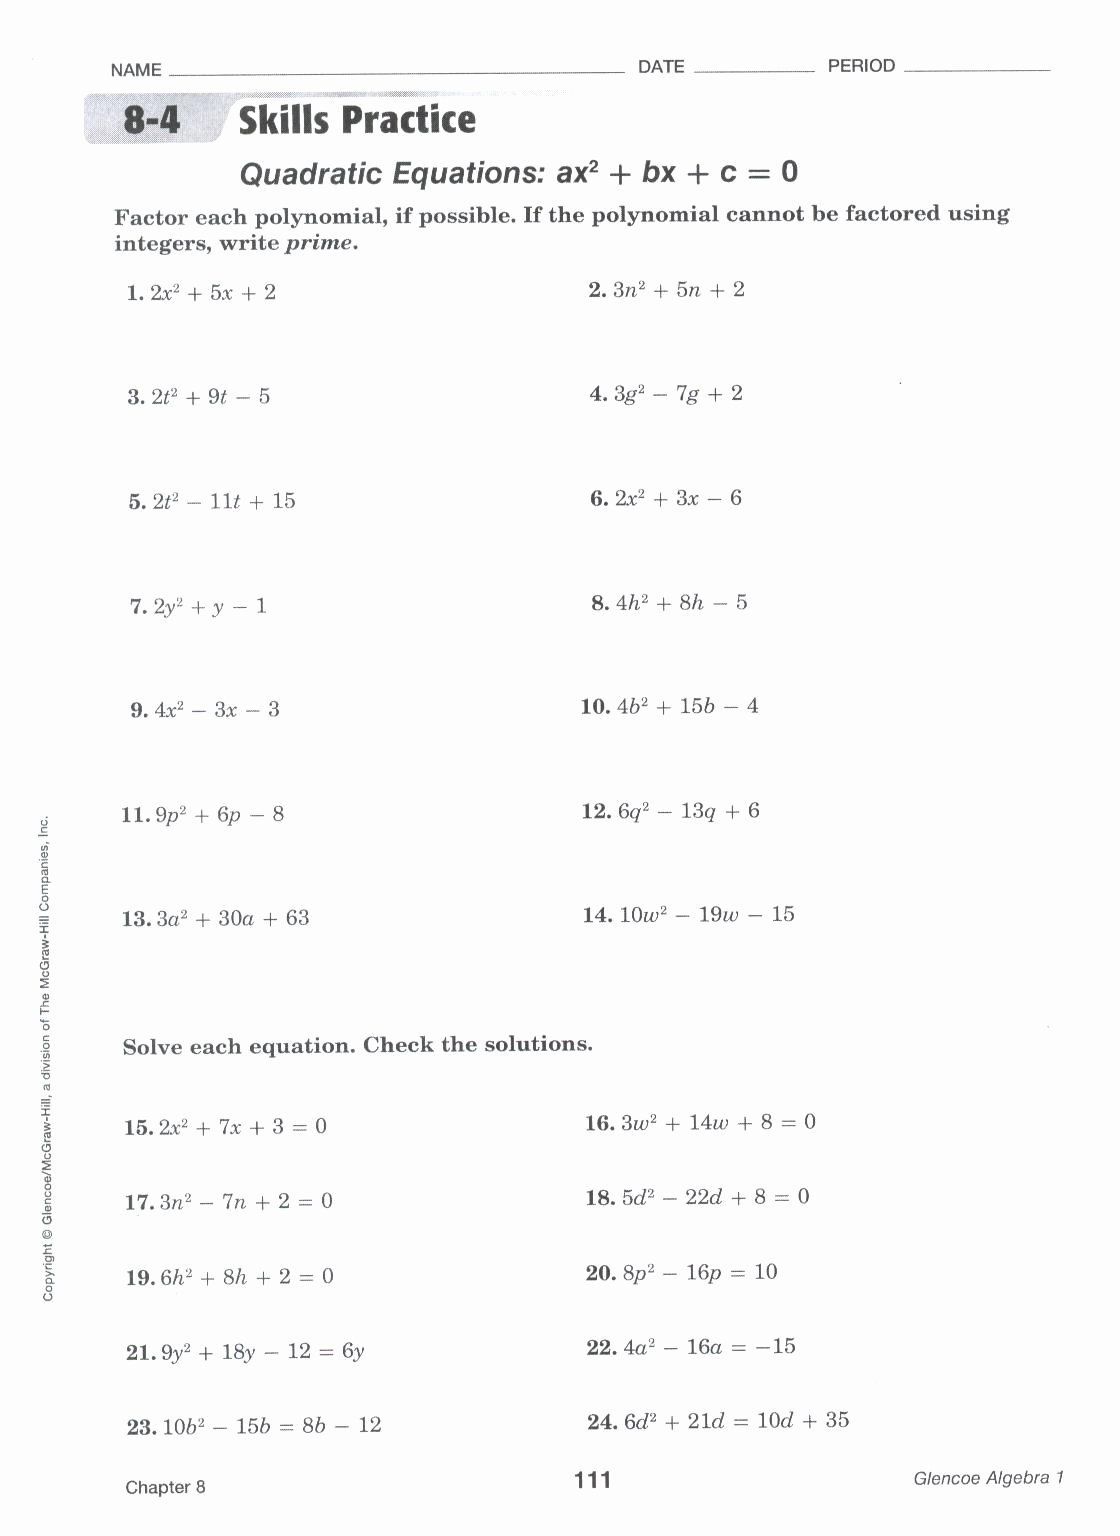 Solving Equations by Factoring Worksheet Luxury Quadratic formula Worksheet Yahoo Image Search Results